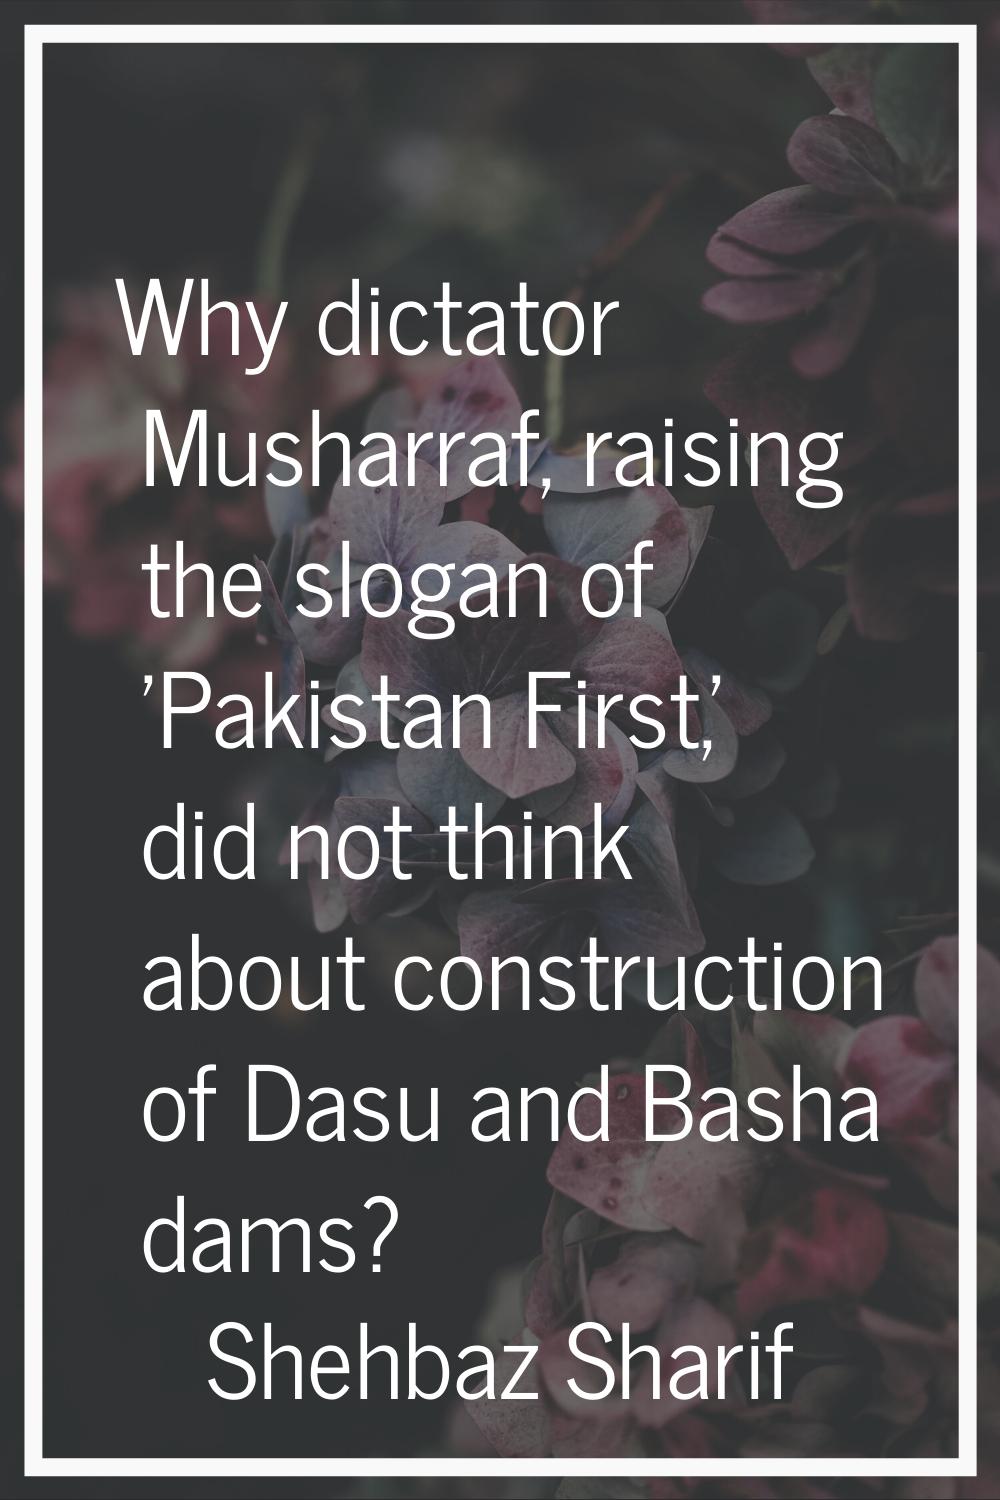 Why dictator Musharraf, raising the slogan of 'Pakistan First,' did not think about construction of